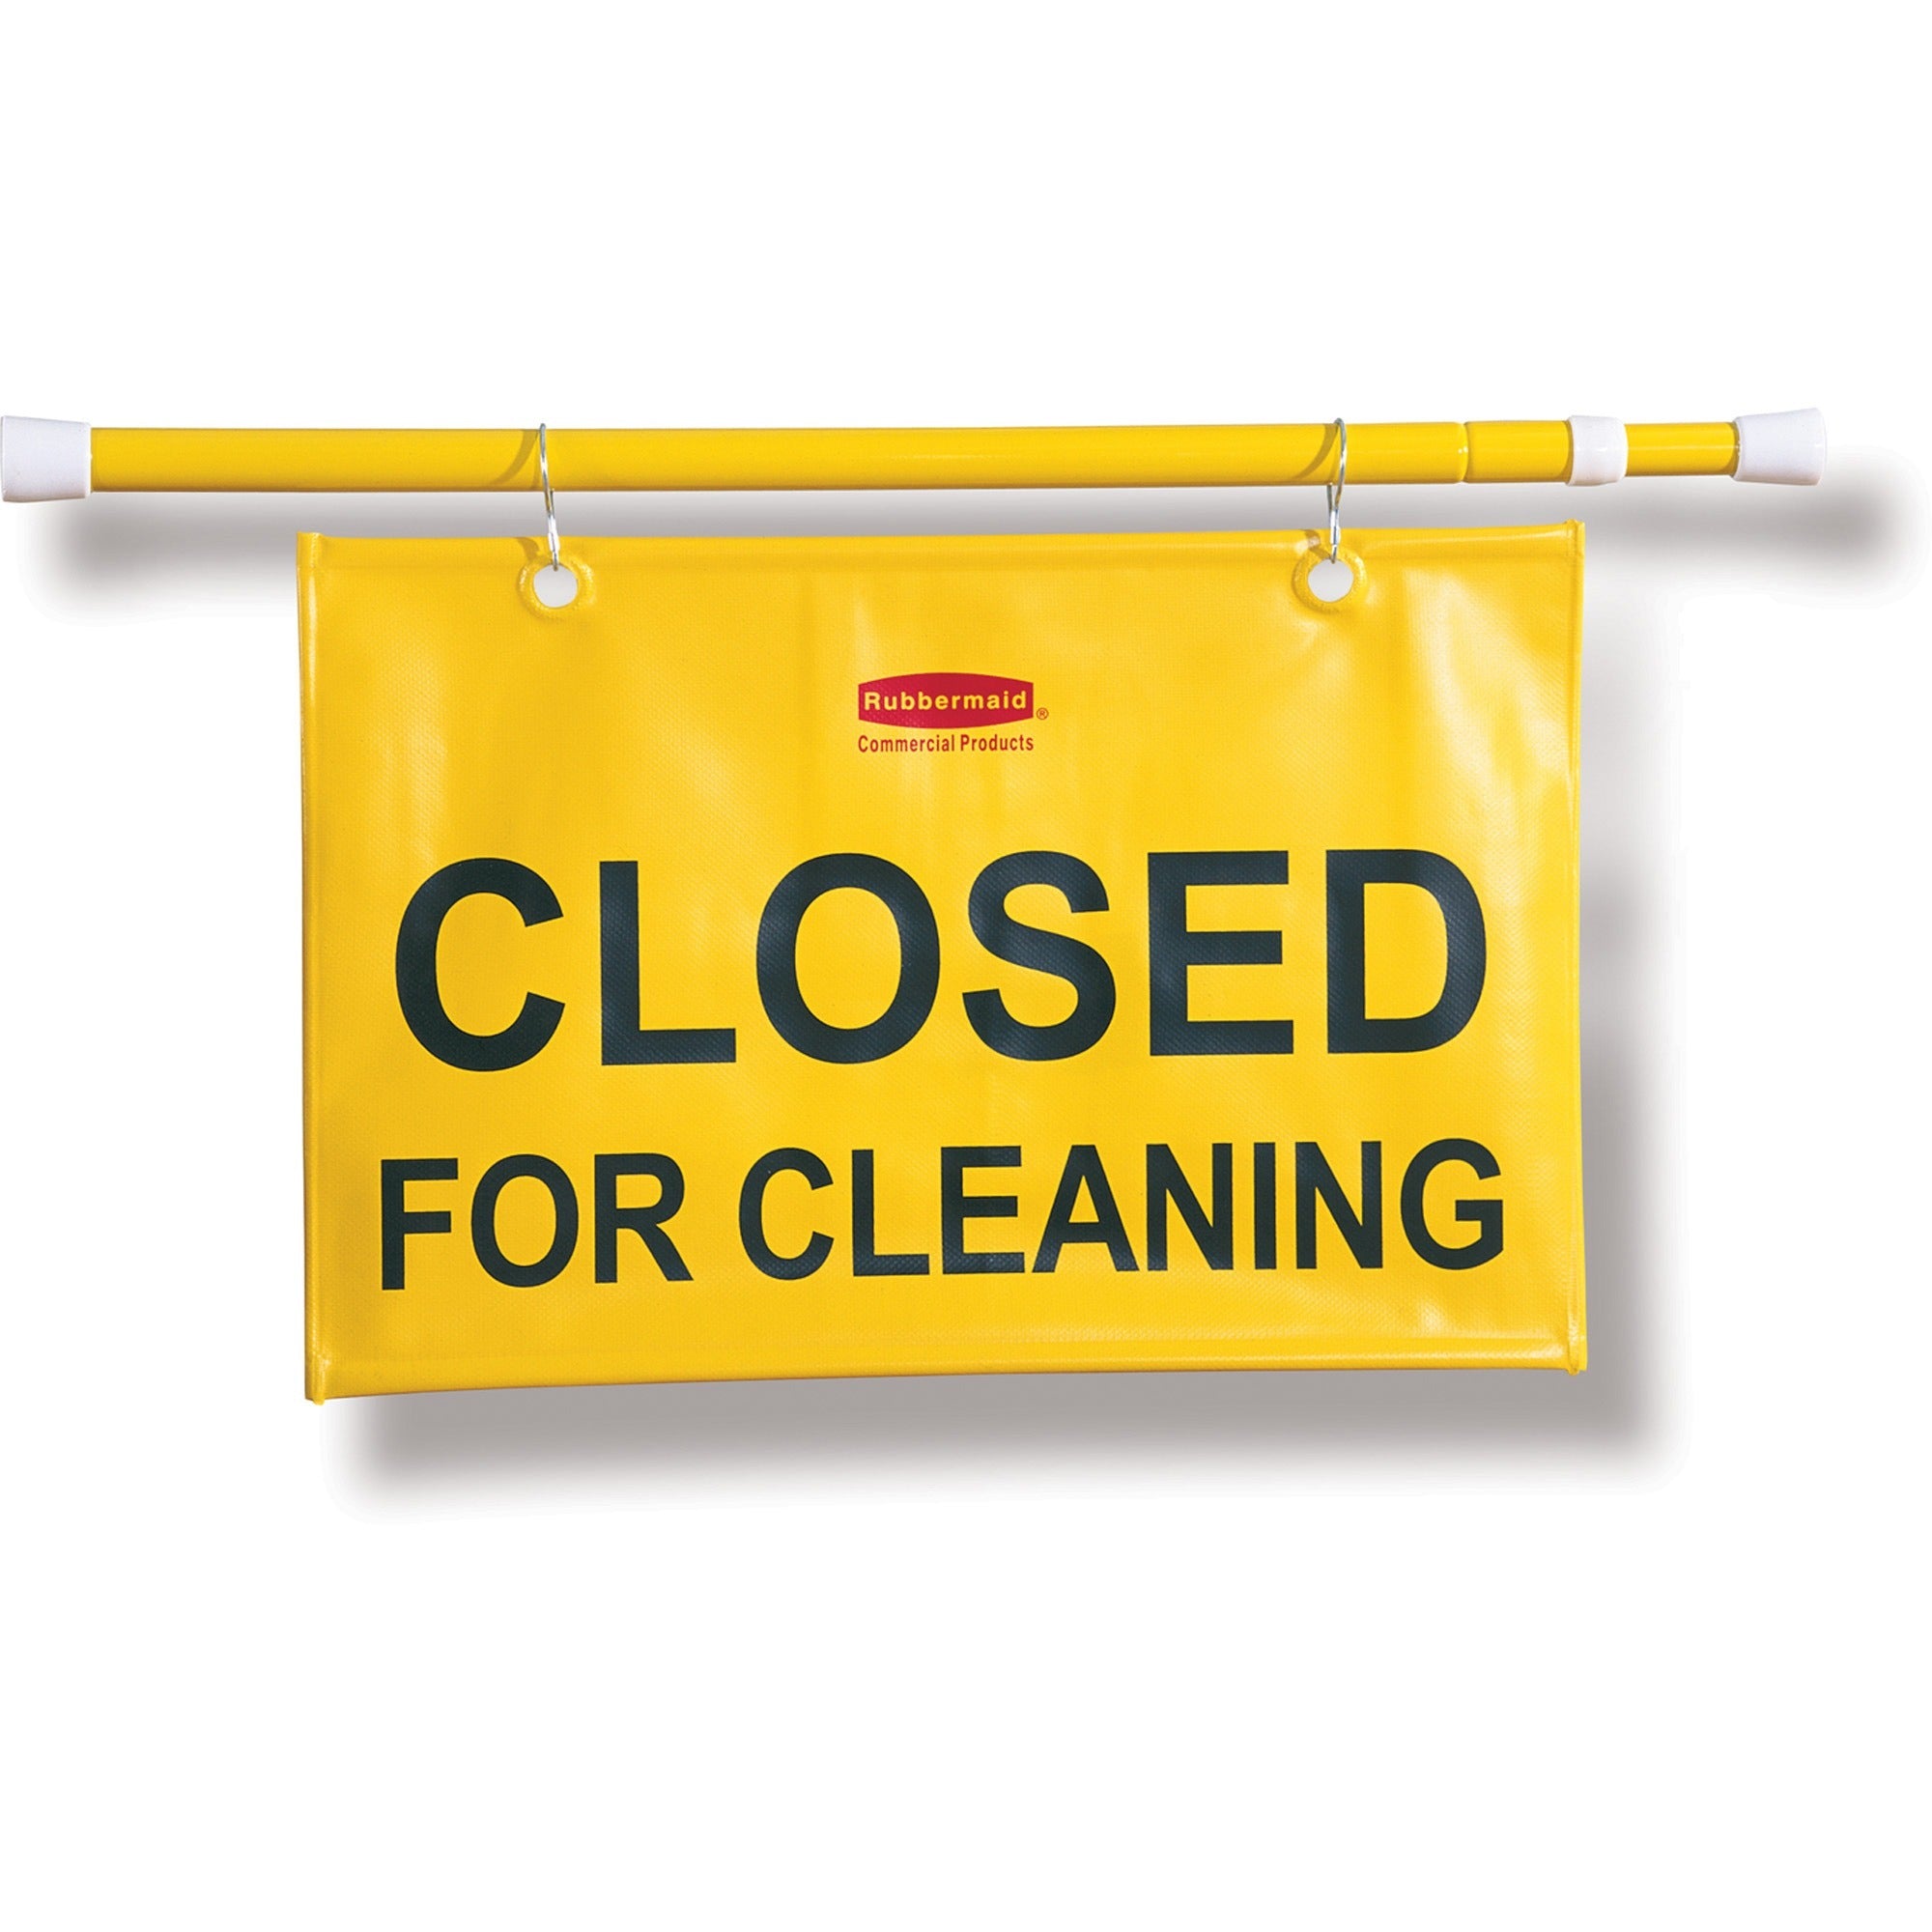 rubbermaid-commercial-closed-for-cleaning-safety-sign-6-carton-closed-for-cleaning-print-message-50-width-x-13-height-x-1-depth-rectangular-shape-hanging-durable-grommet-yellow_rcp9s1500ywct - 1